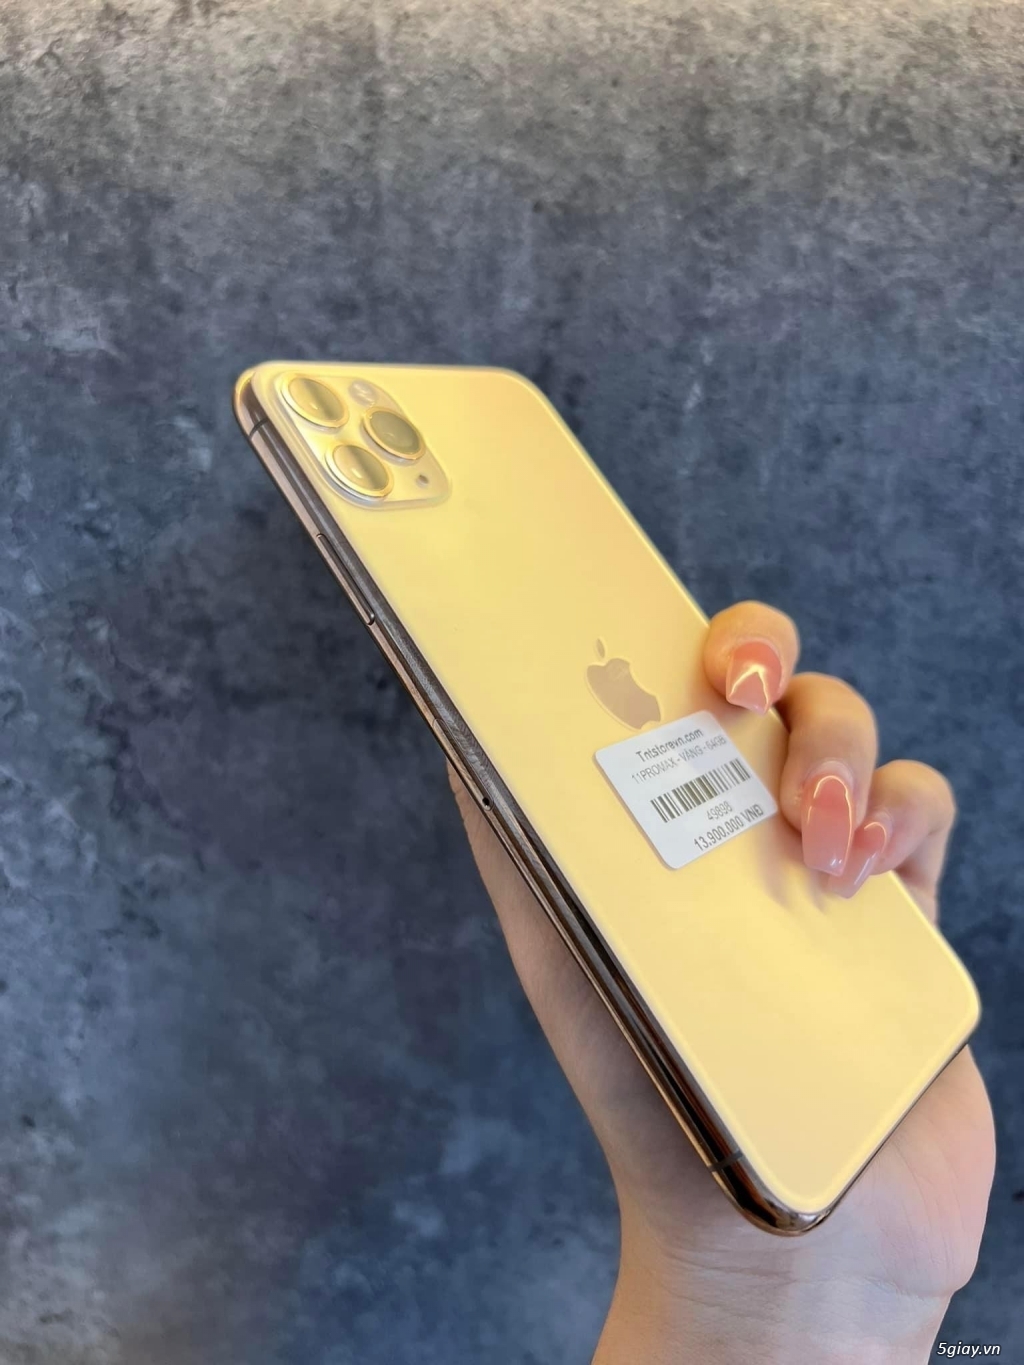 Iphone 11promax 64G Gold giá tốt 5giay.vn